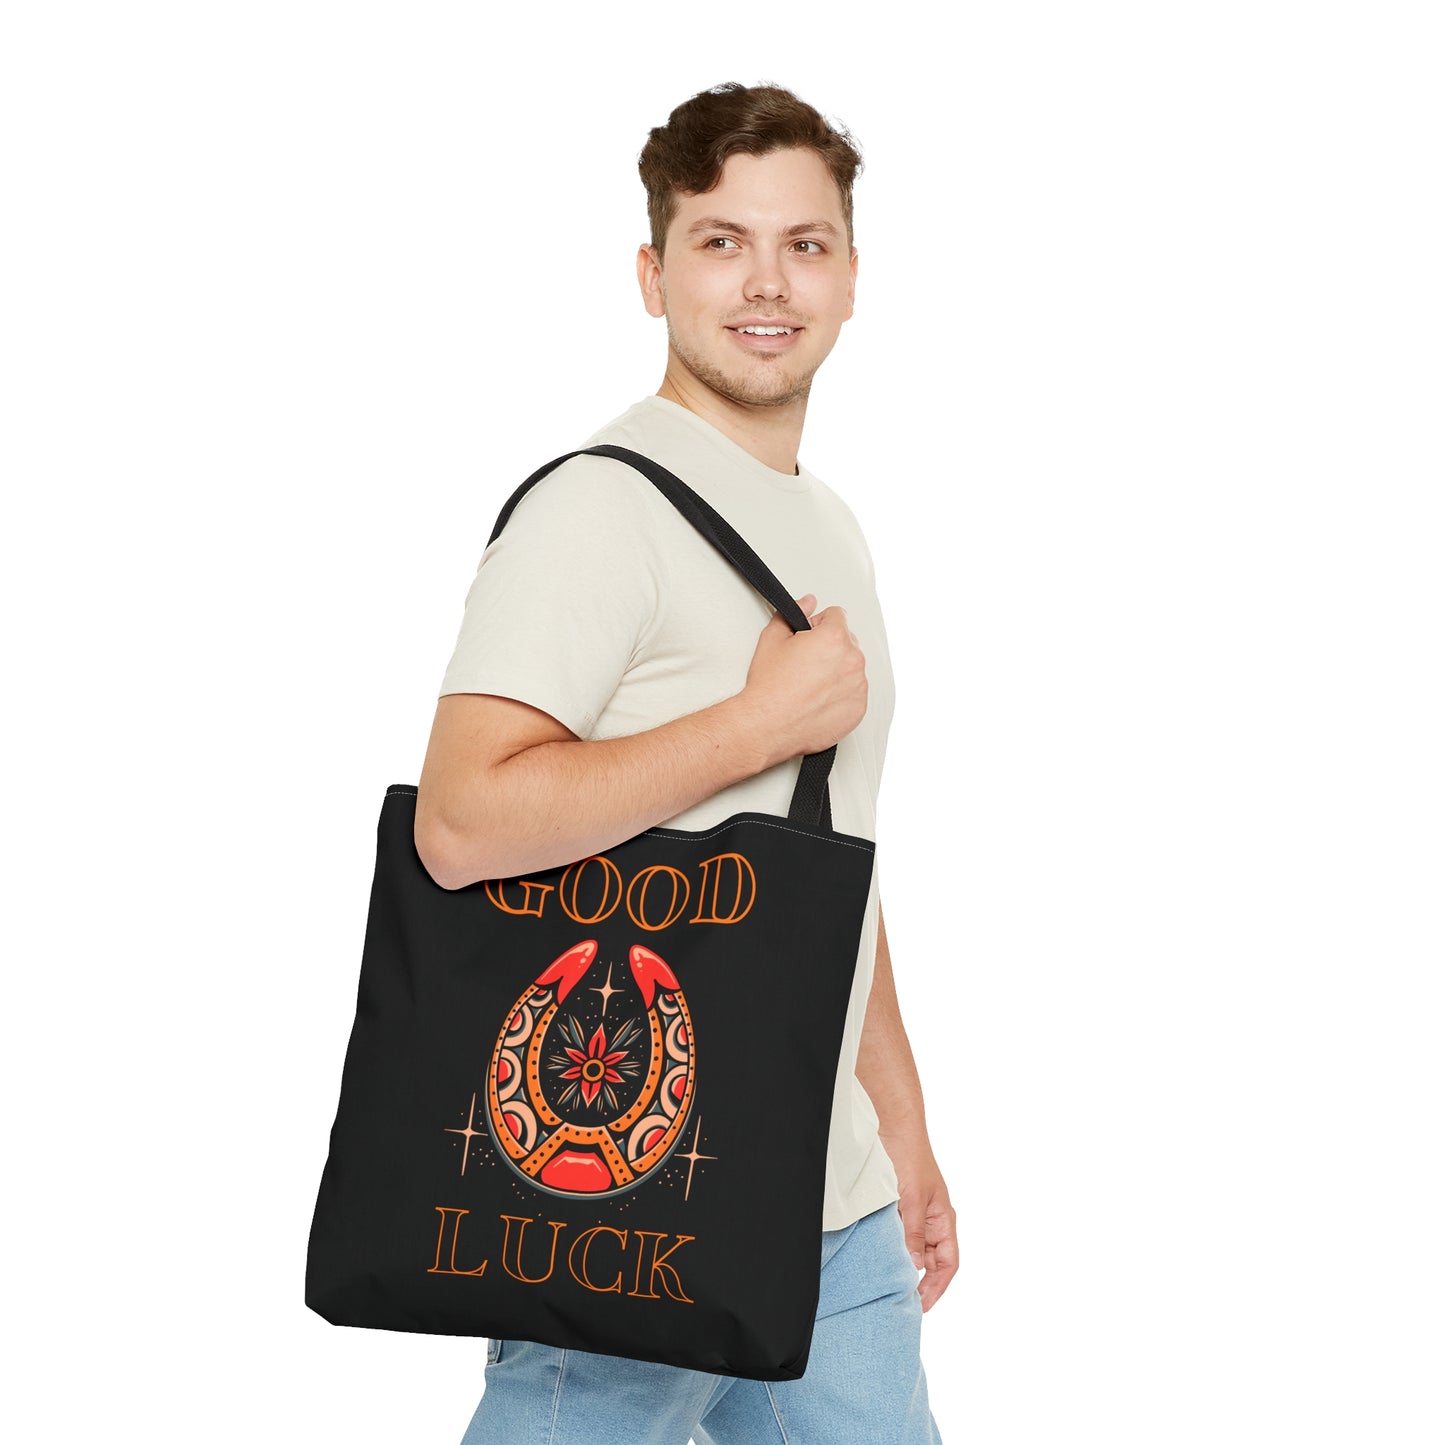 Copy of Good Luck Tattoo Tote Bag in Black / Vintage American Old School Traditional Tattoo Flash / Punk Rock Beach Shopping Bag Lucky - Foxlark Crystal Jewelry